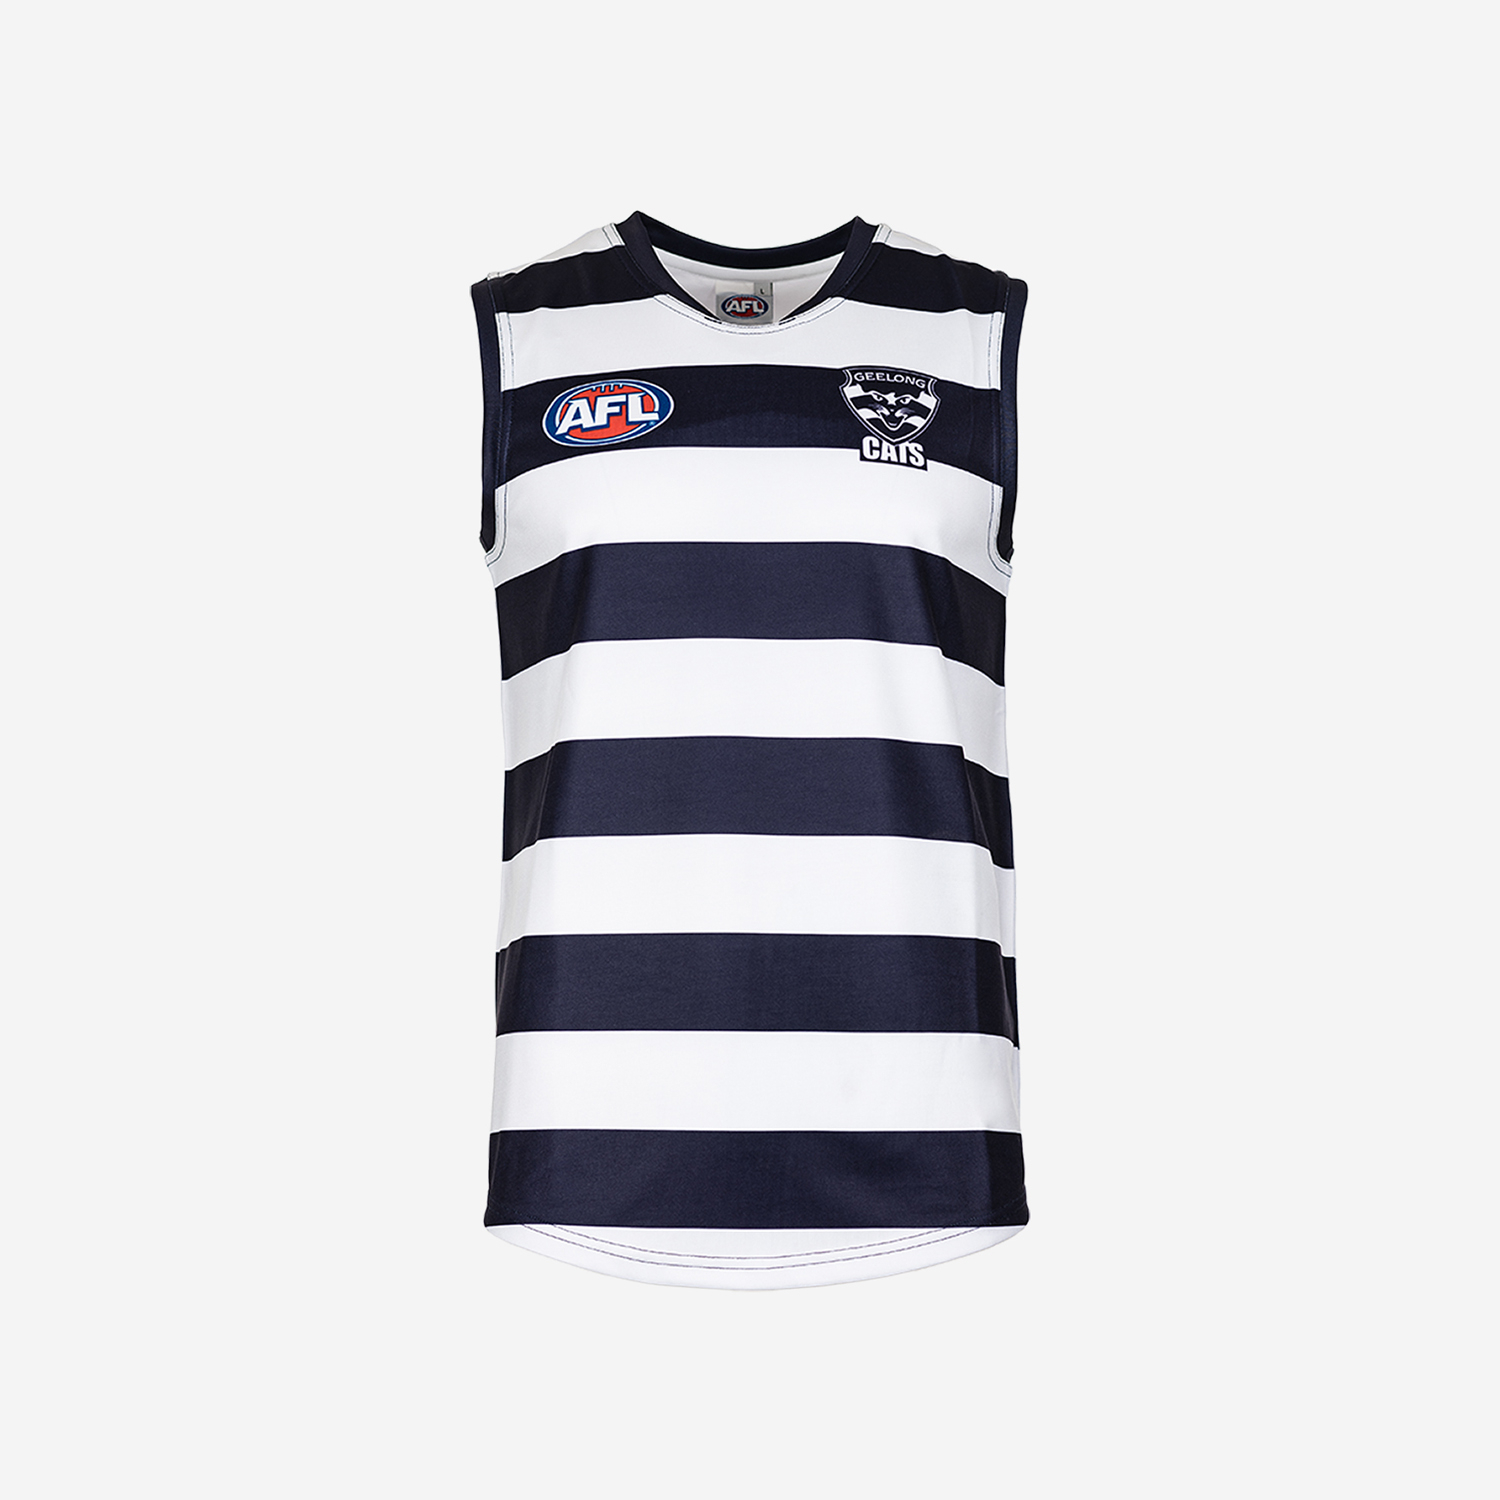 Geelong Youth Guernsey